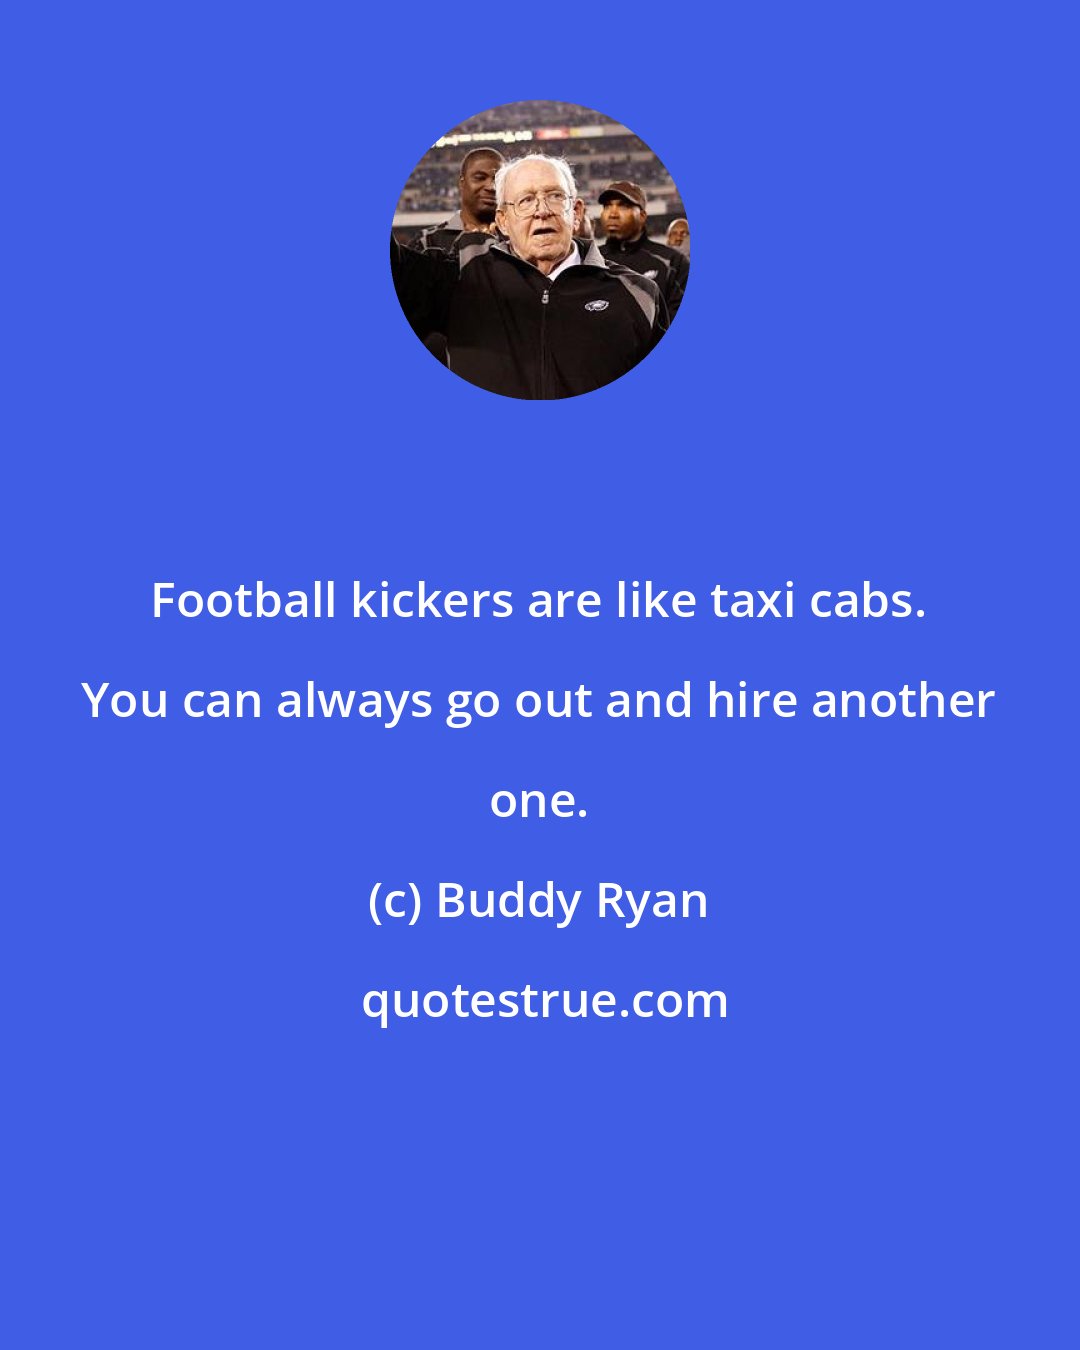 Buddy Ryan: Football kickers are like taxi cabs. You can always go out and hire another one.